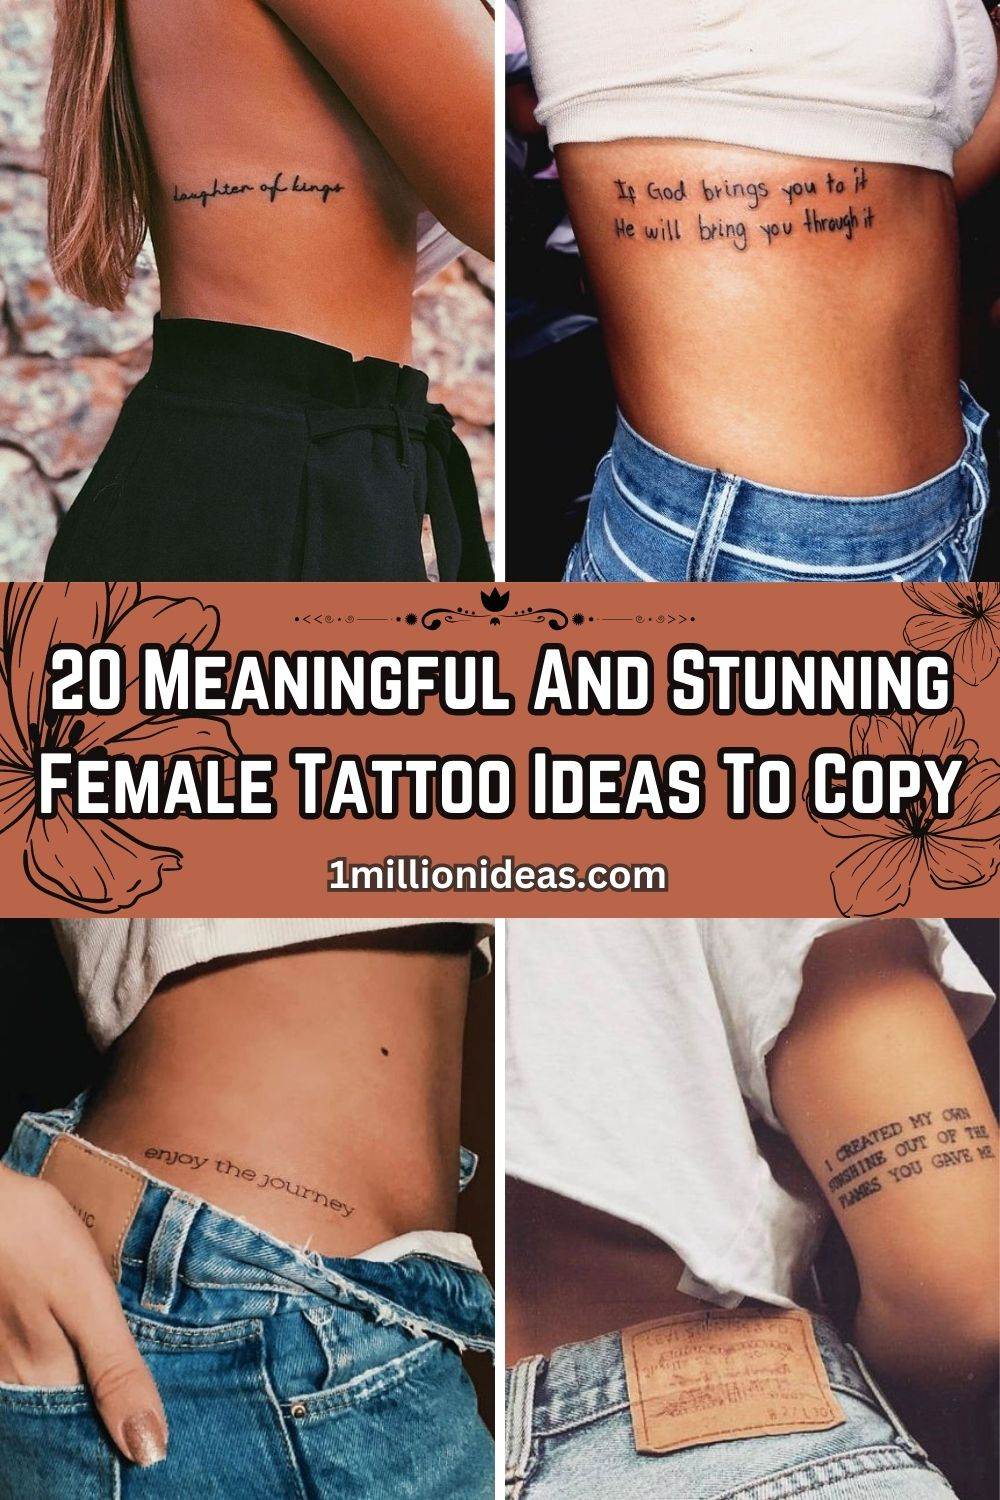 20 Meaningful And Stunning Female Tattoo Ideas To Copy - 131